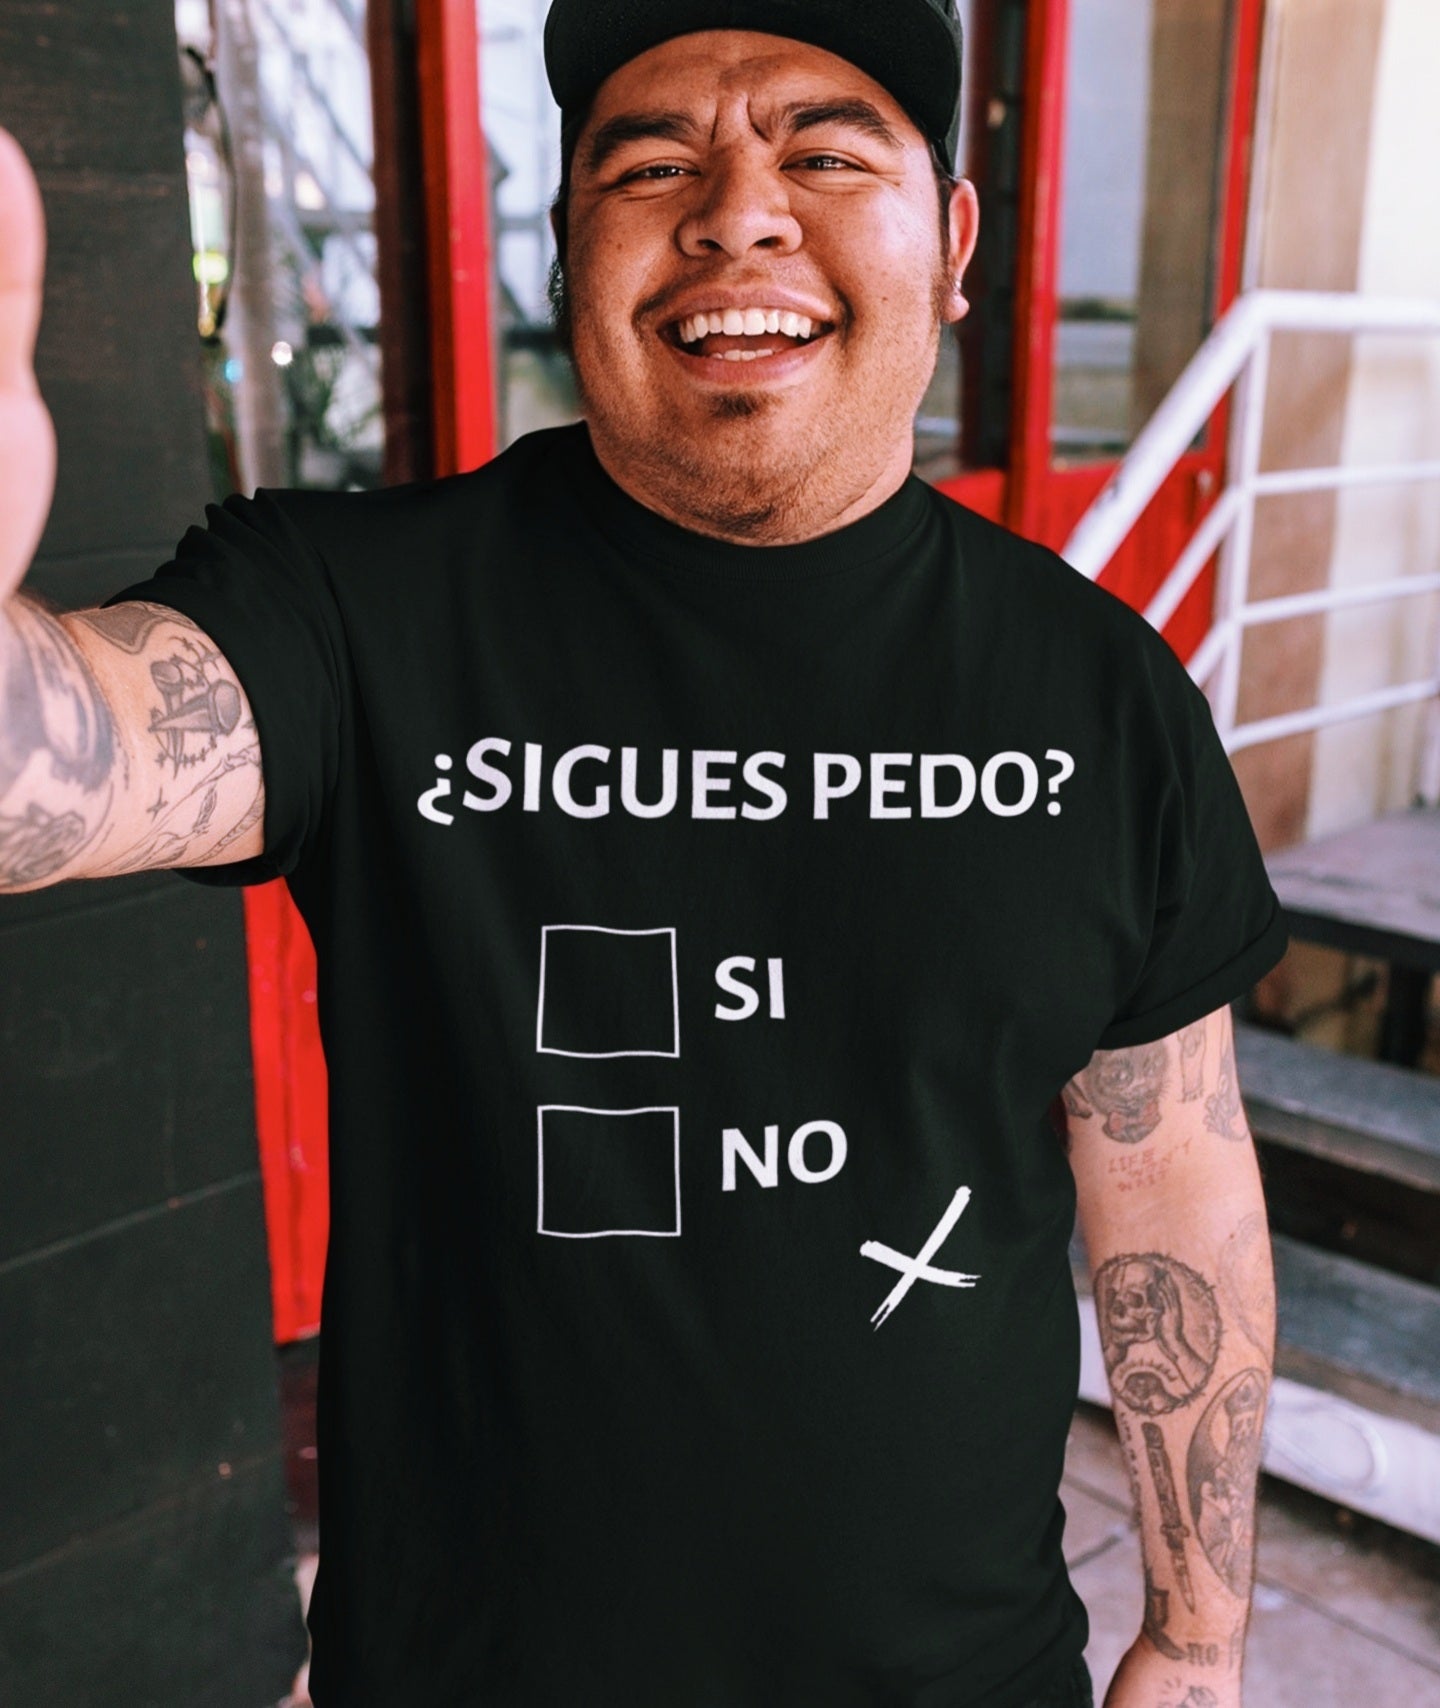 Latino man wearing a black T-shirt with text "sigues pedo?" and checkboxes "si" and "no", "no" box attempted to be marked with an "x" but off center, symbolizing a drunken state